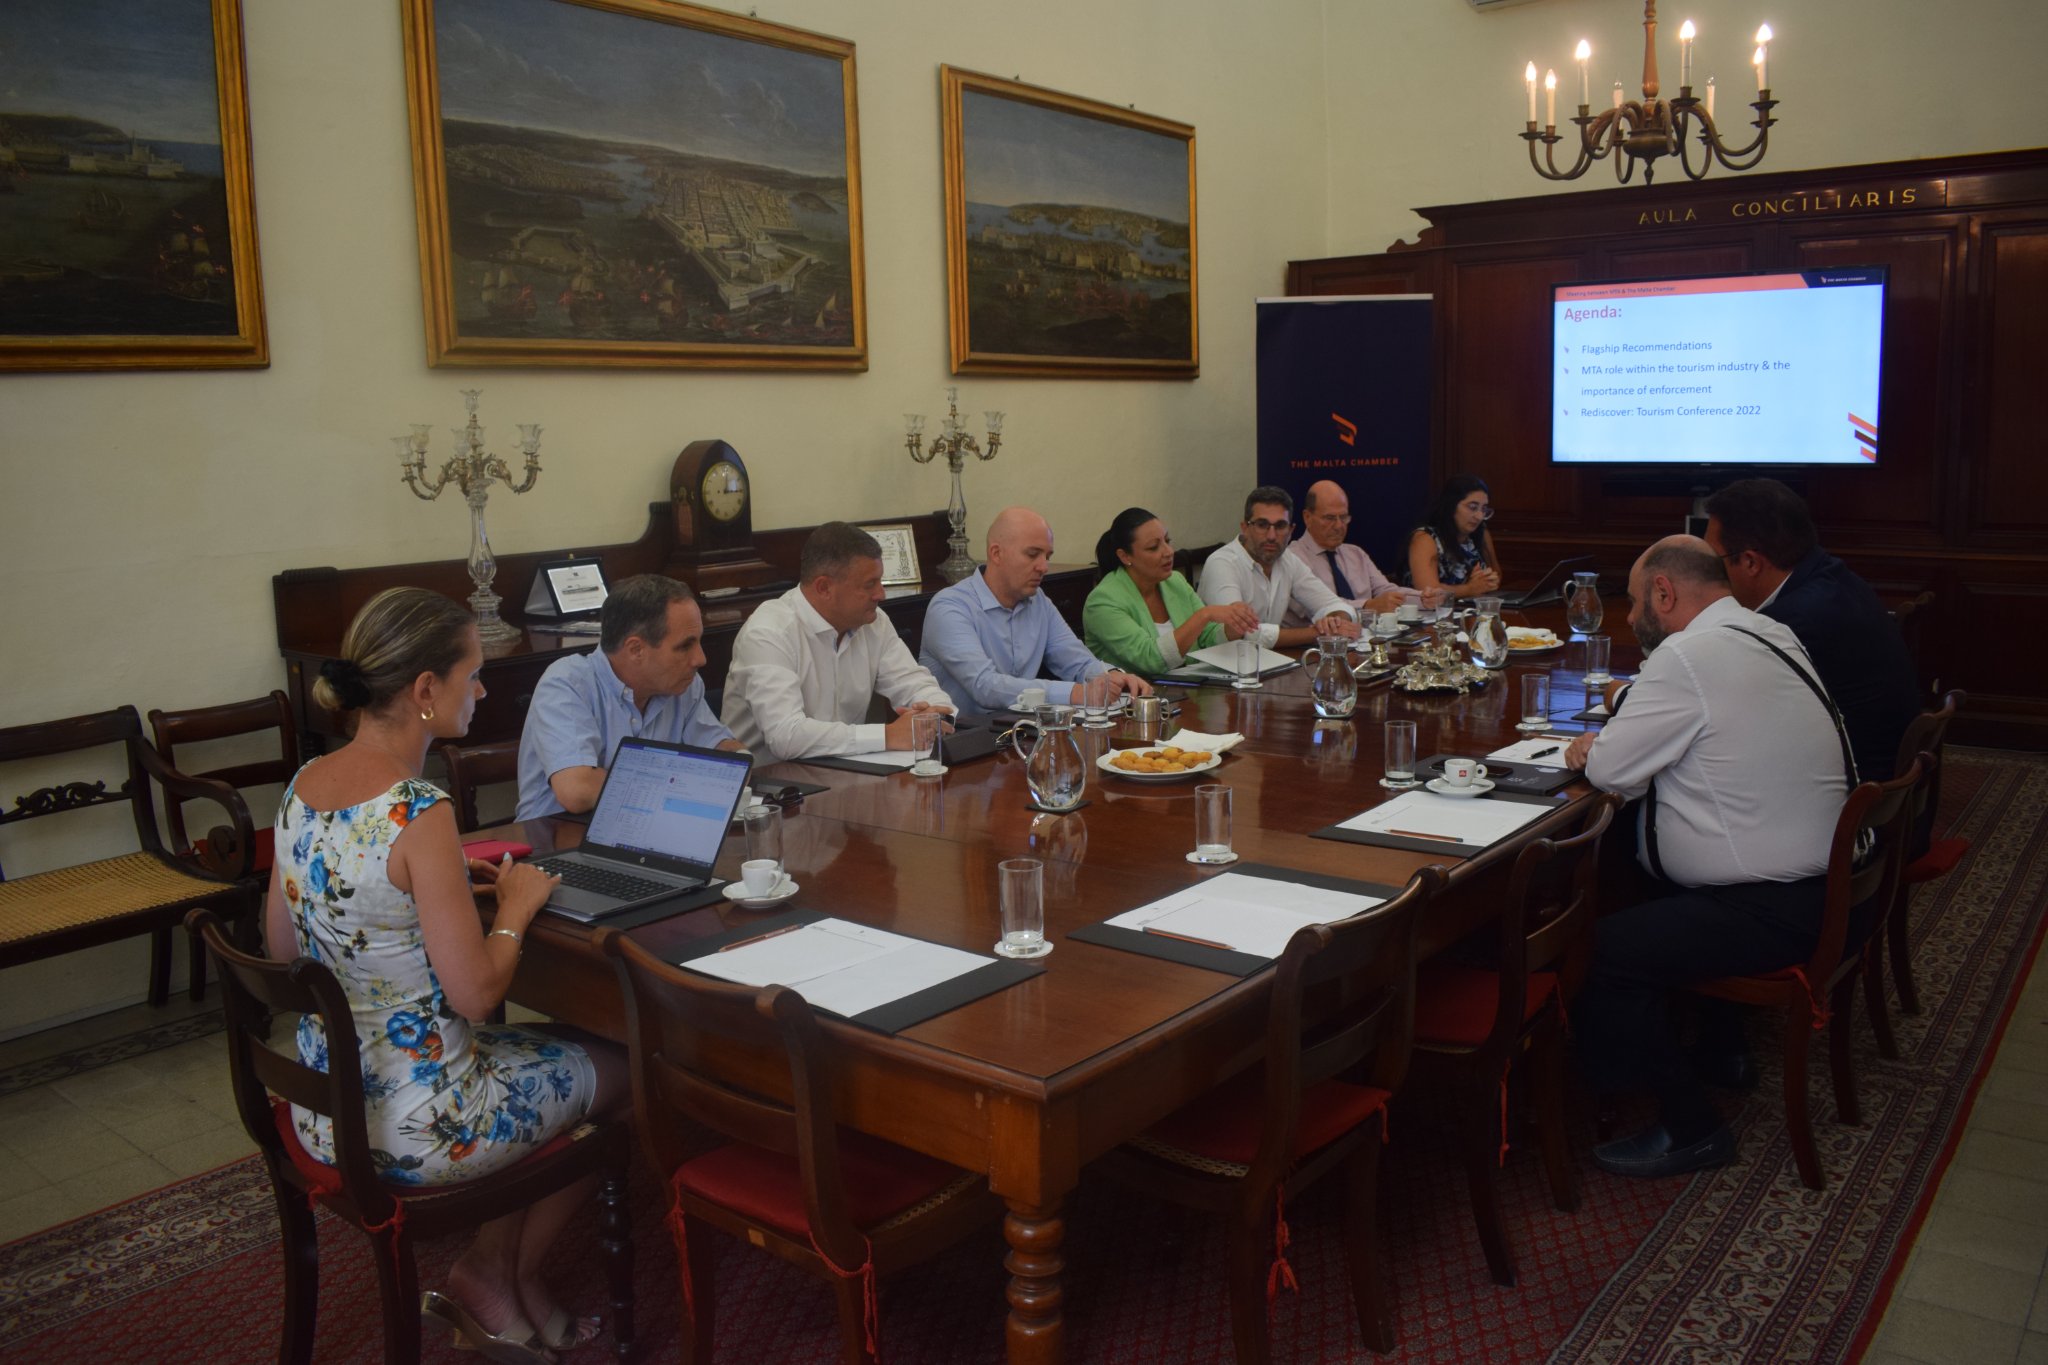 The Malta Chamber outlines Tourism industry priorities with Malta Tourism Authority